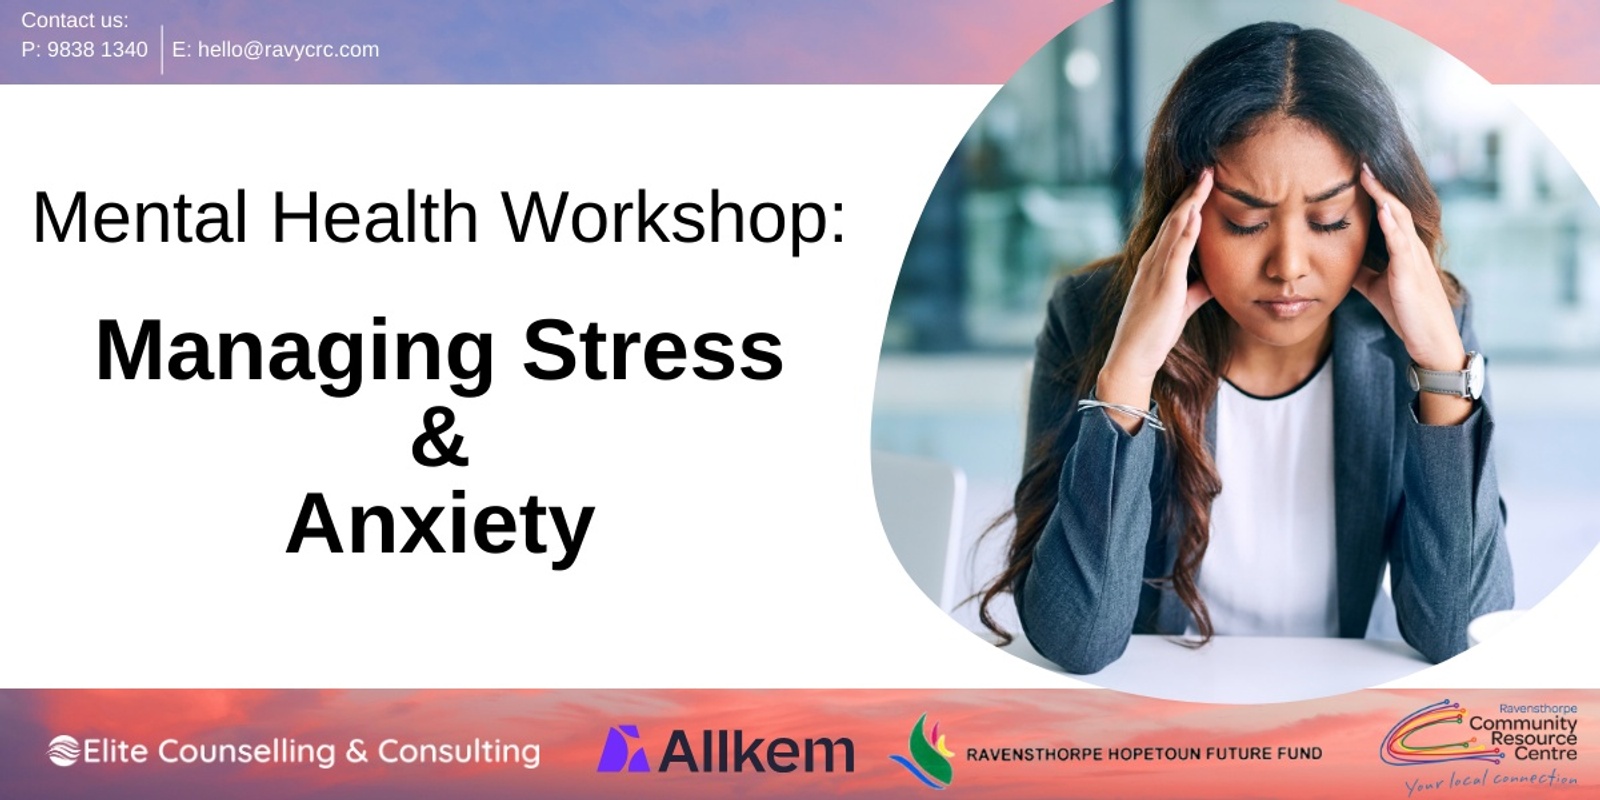 Banner image for Mental Health Workshop - Managing Stress & Anxiety